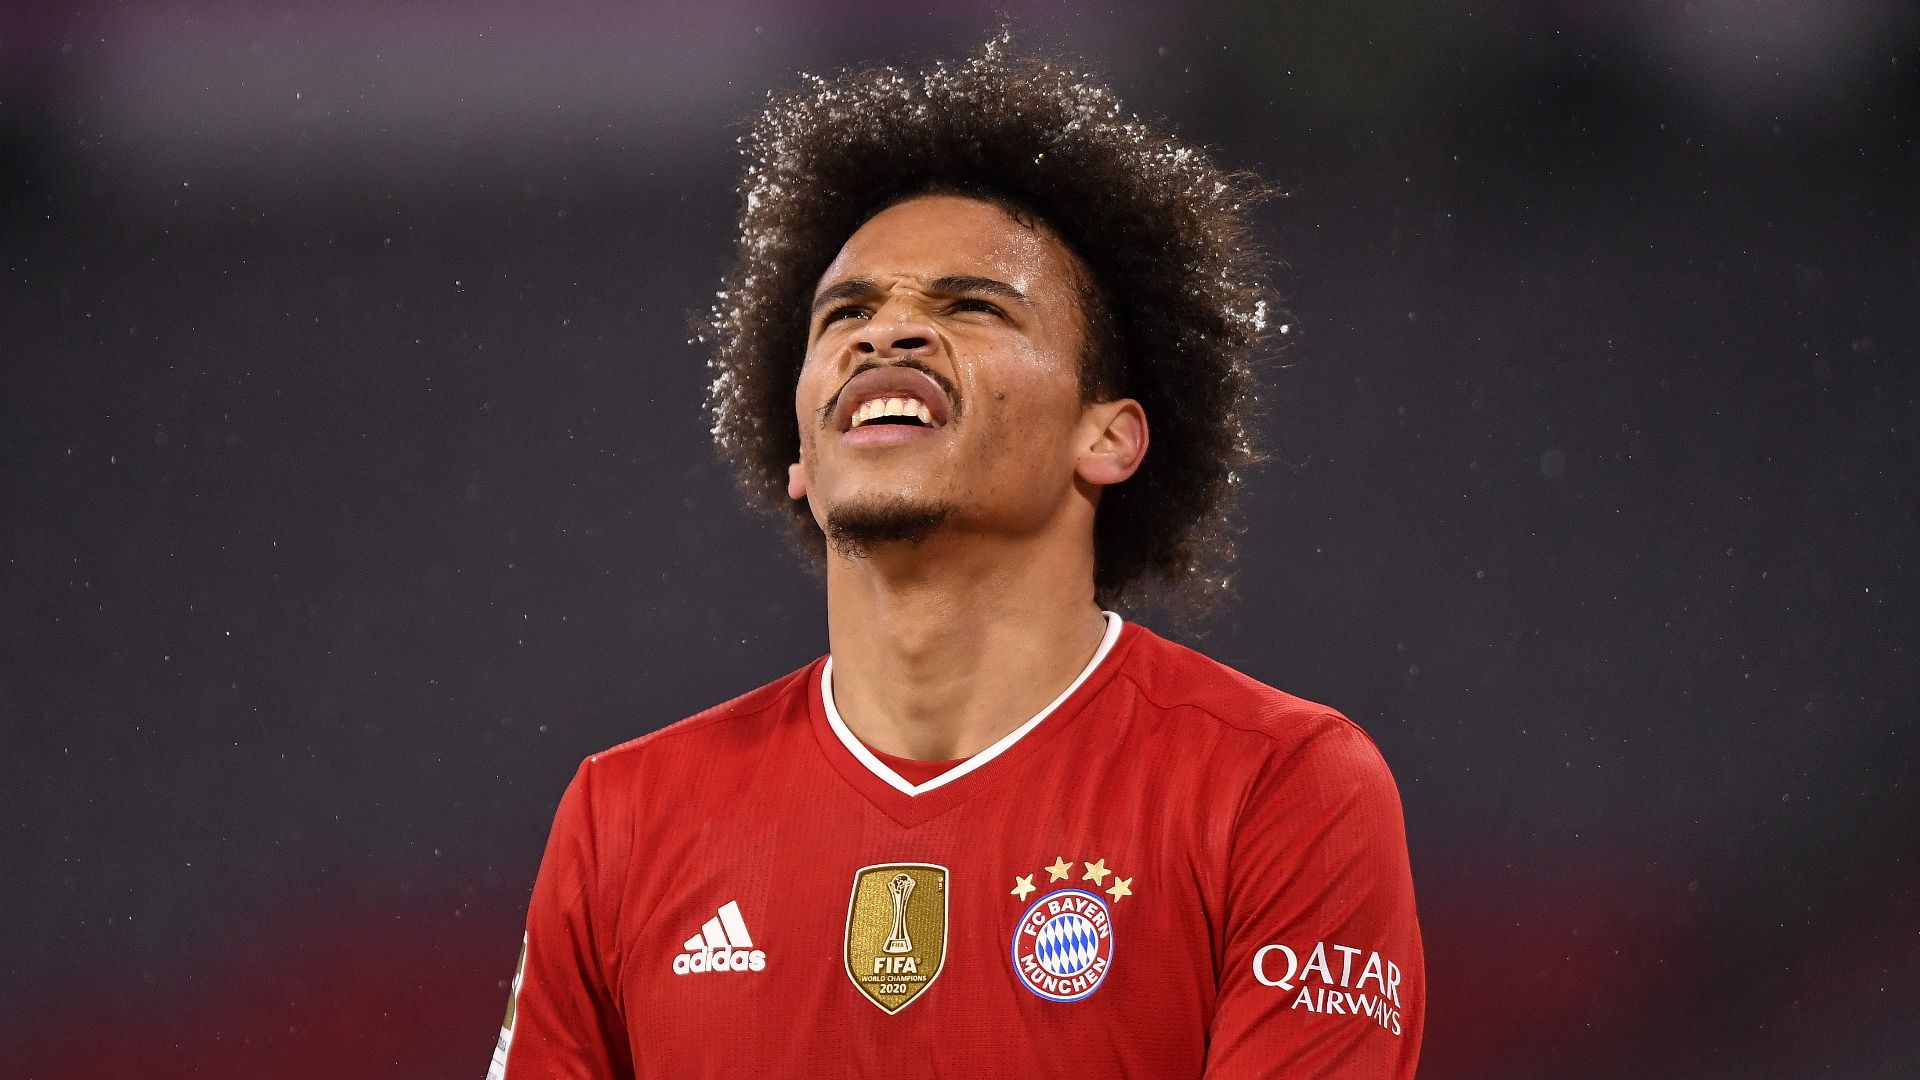 Unfinished' Sane criticised as Bayern Munich crash out of Champions League